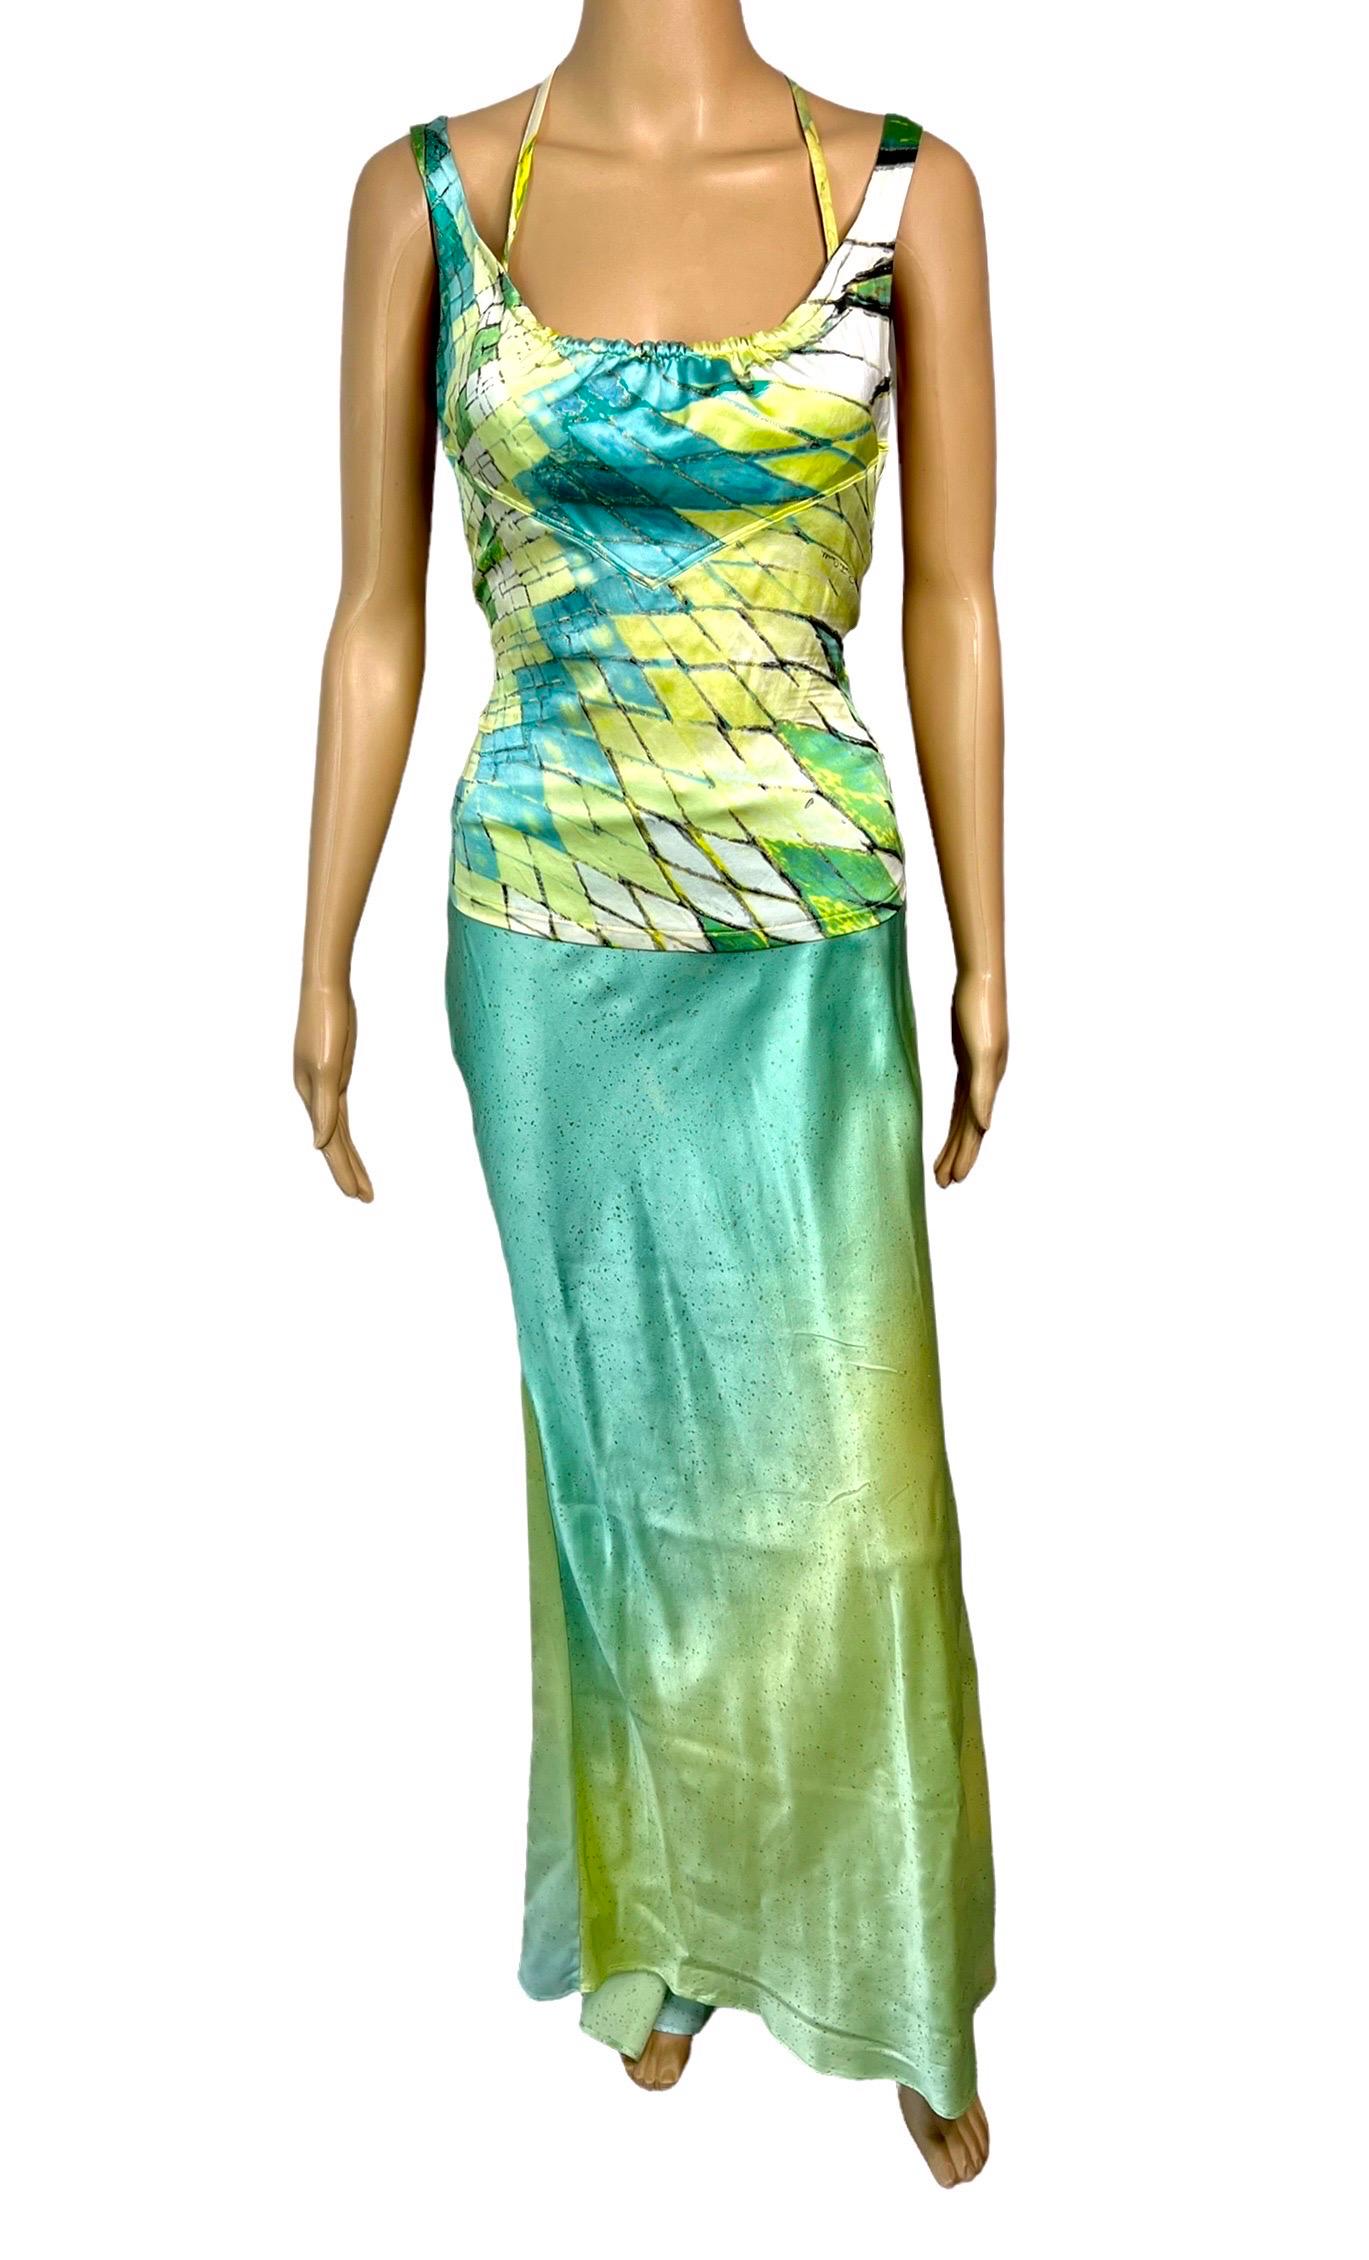 Green Roberto Cavalli S/S 2004 Feather Embellished Halter Top & Maxi Skirt 2 Piece Set For Sale